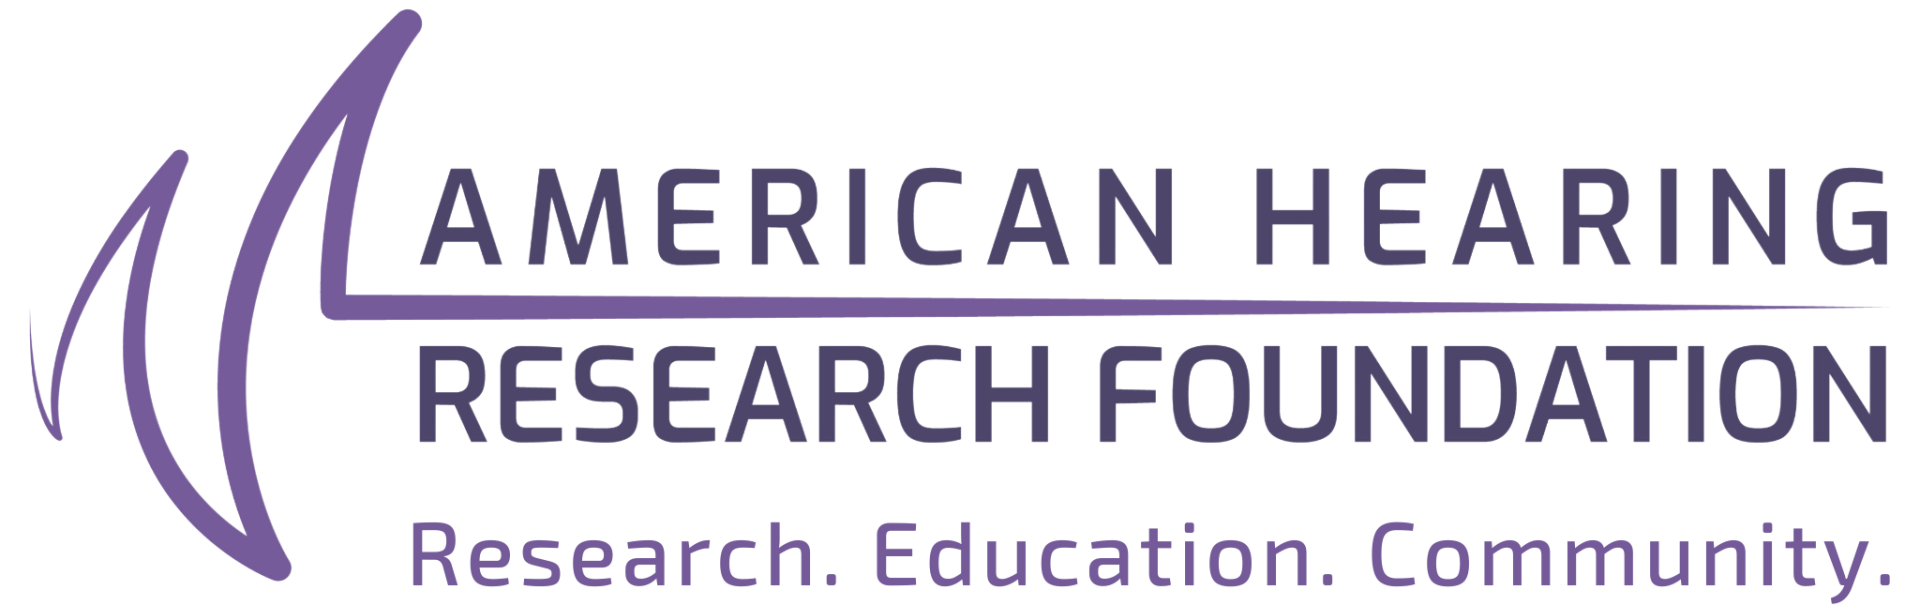 American Hearing Research Foundation